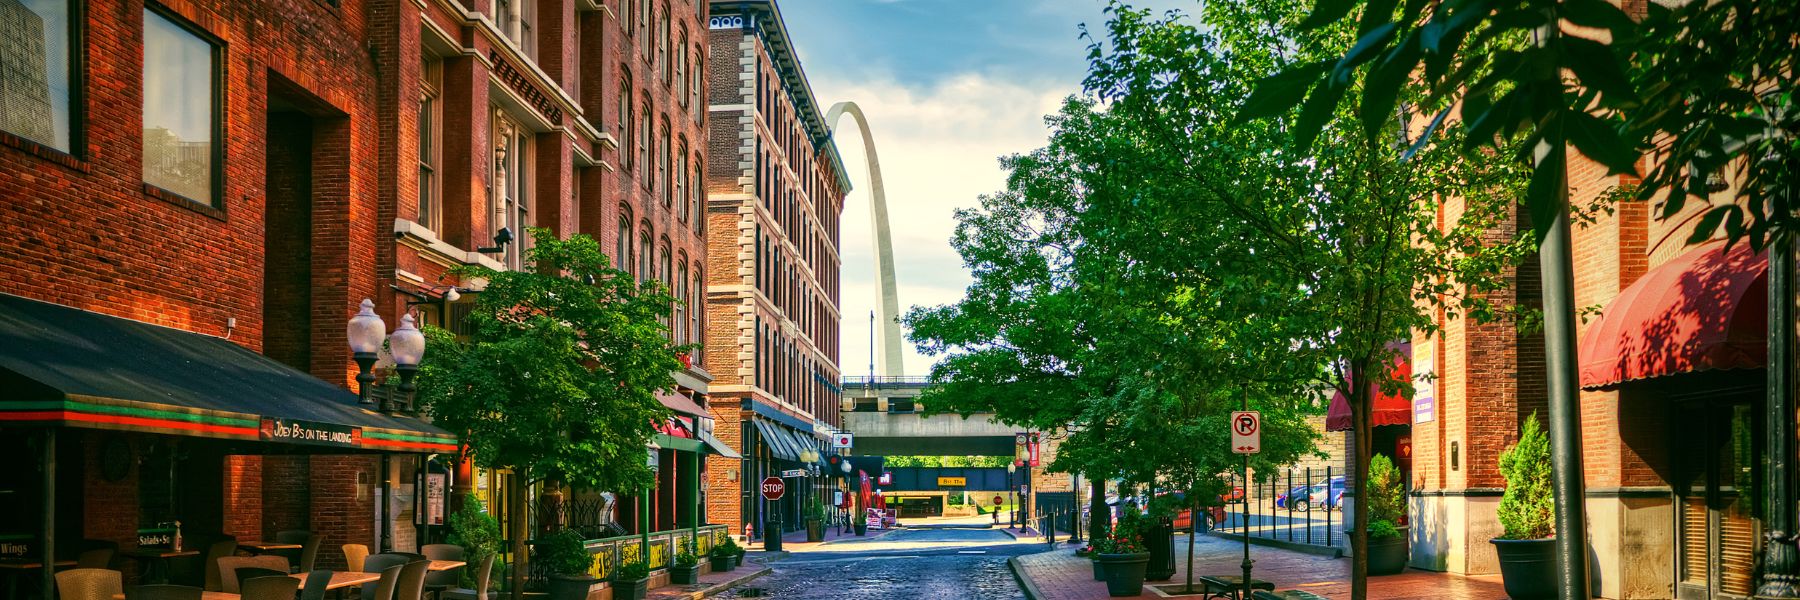 Laclede’s Landing, a riverfront district in St. Louis, combines 19th-century architecture and 21st-century entertainment.